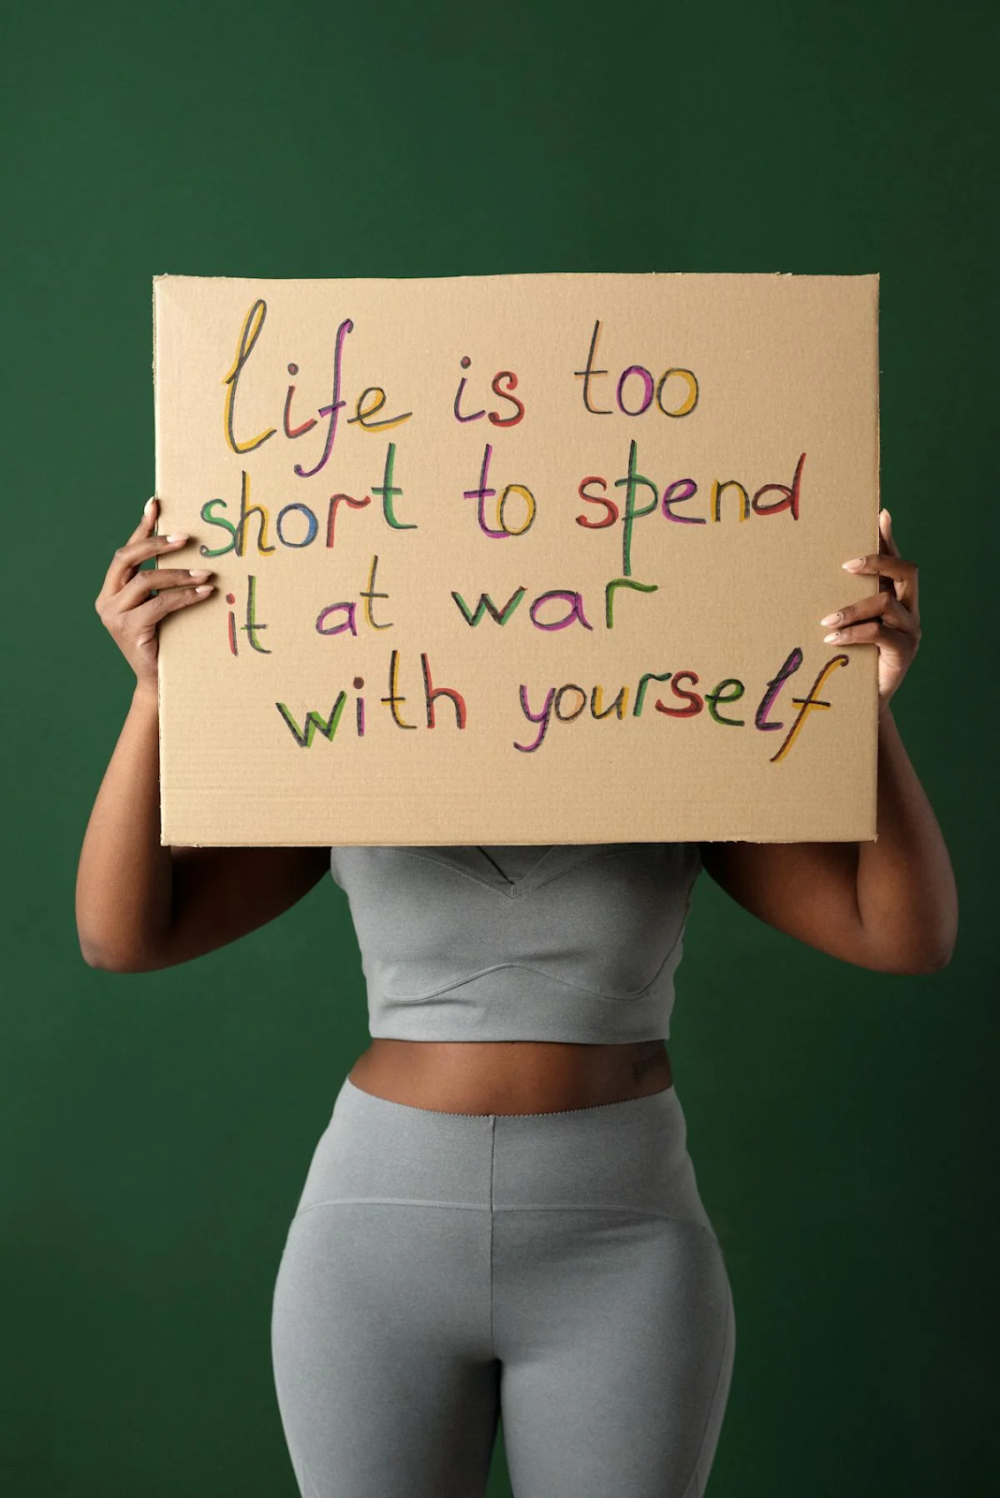 a woman holding a placard stating "life is too short to spend it at war with yourself"